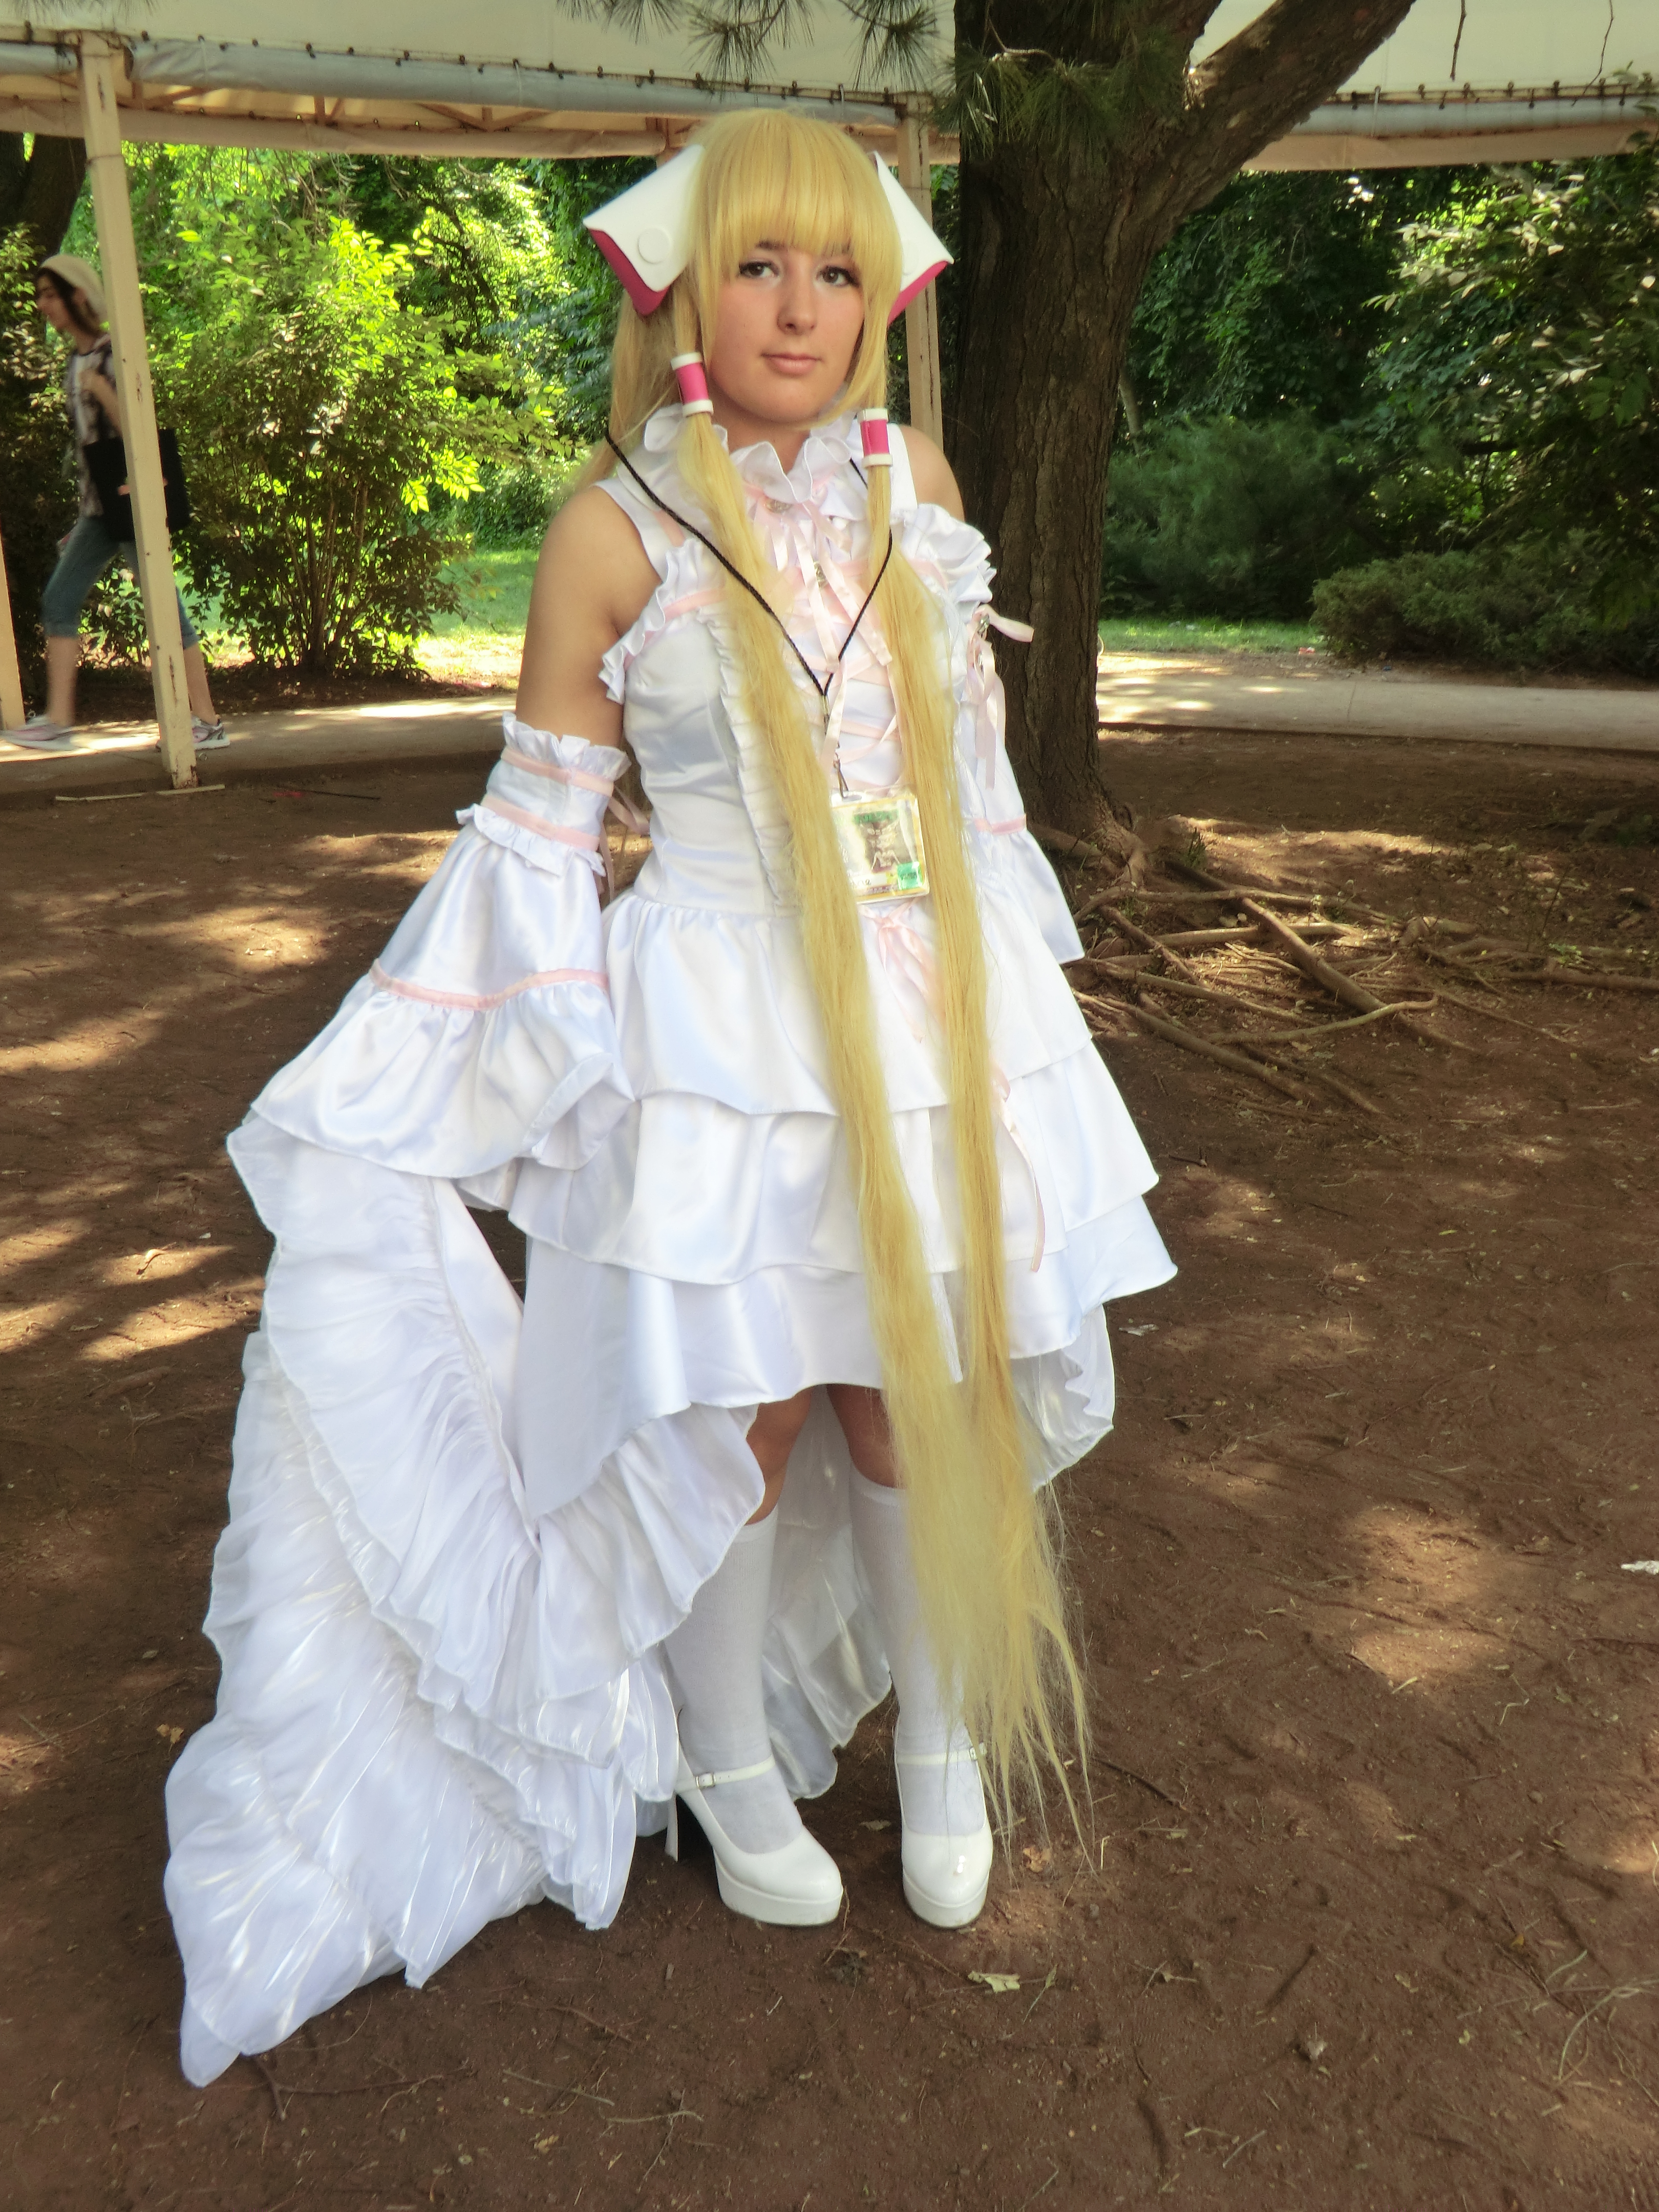 File:Cosplayer of Chi, Chobits at AnimeNEXT 20120610.jpg - Wikimedia Commons